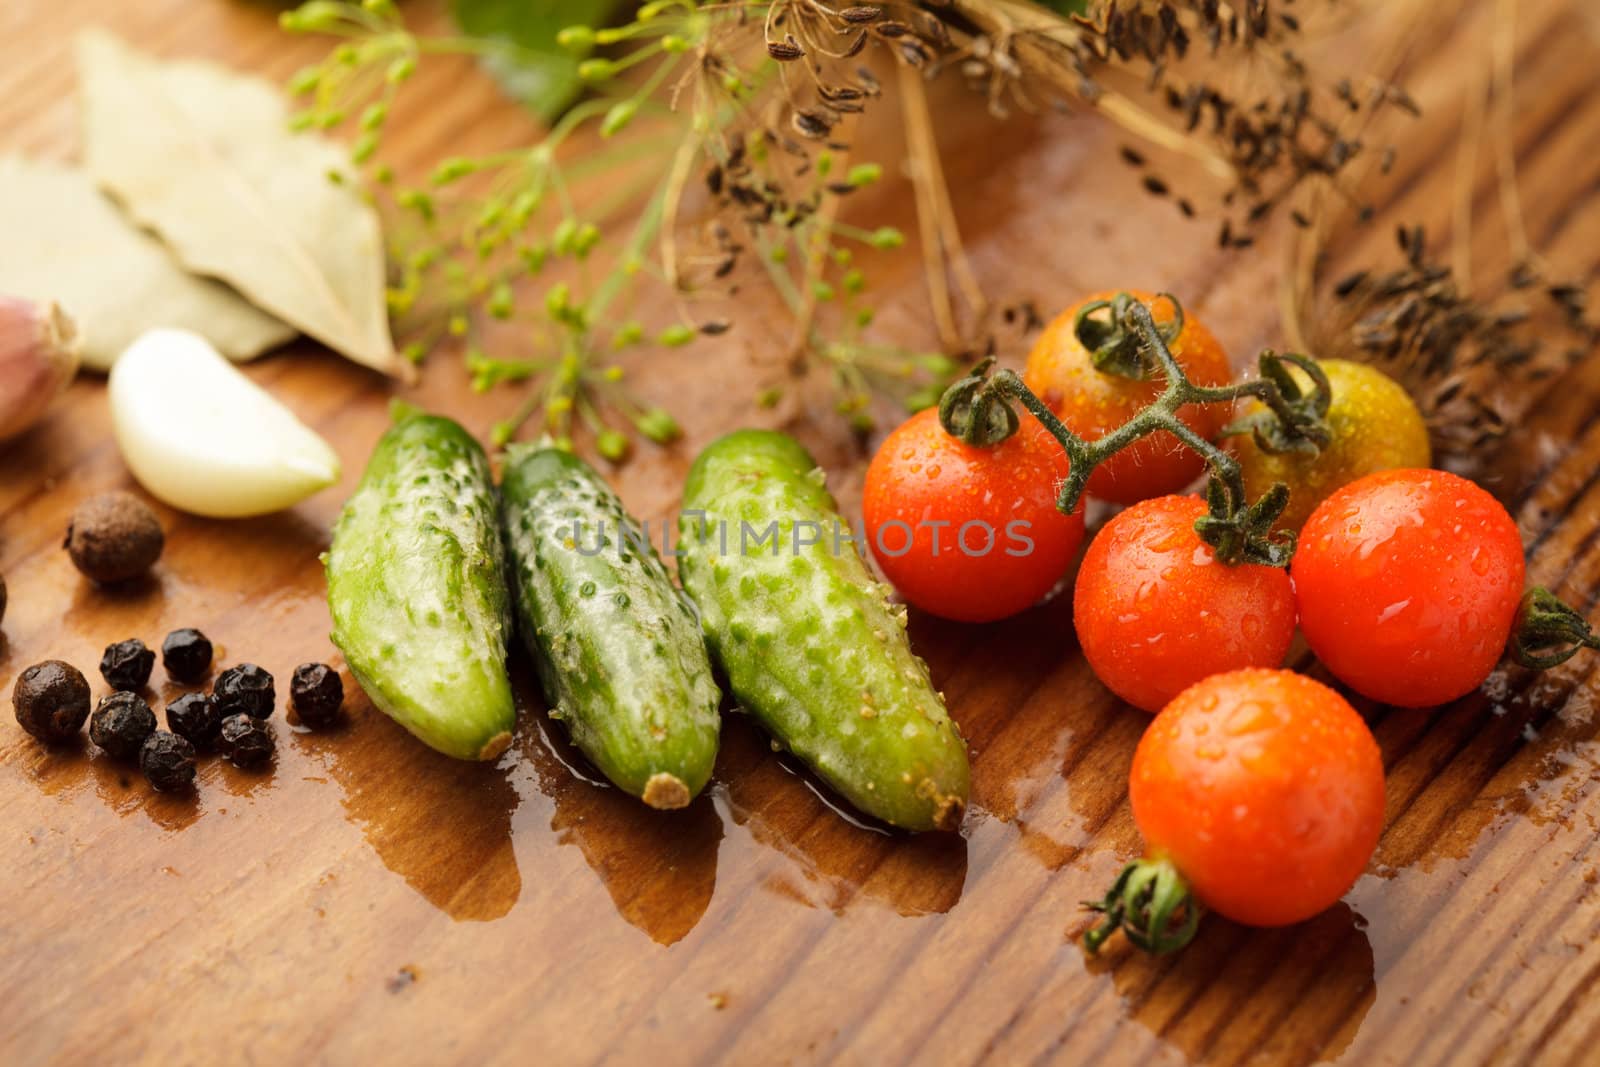 Tomatoes and cucumgers by oksix